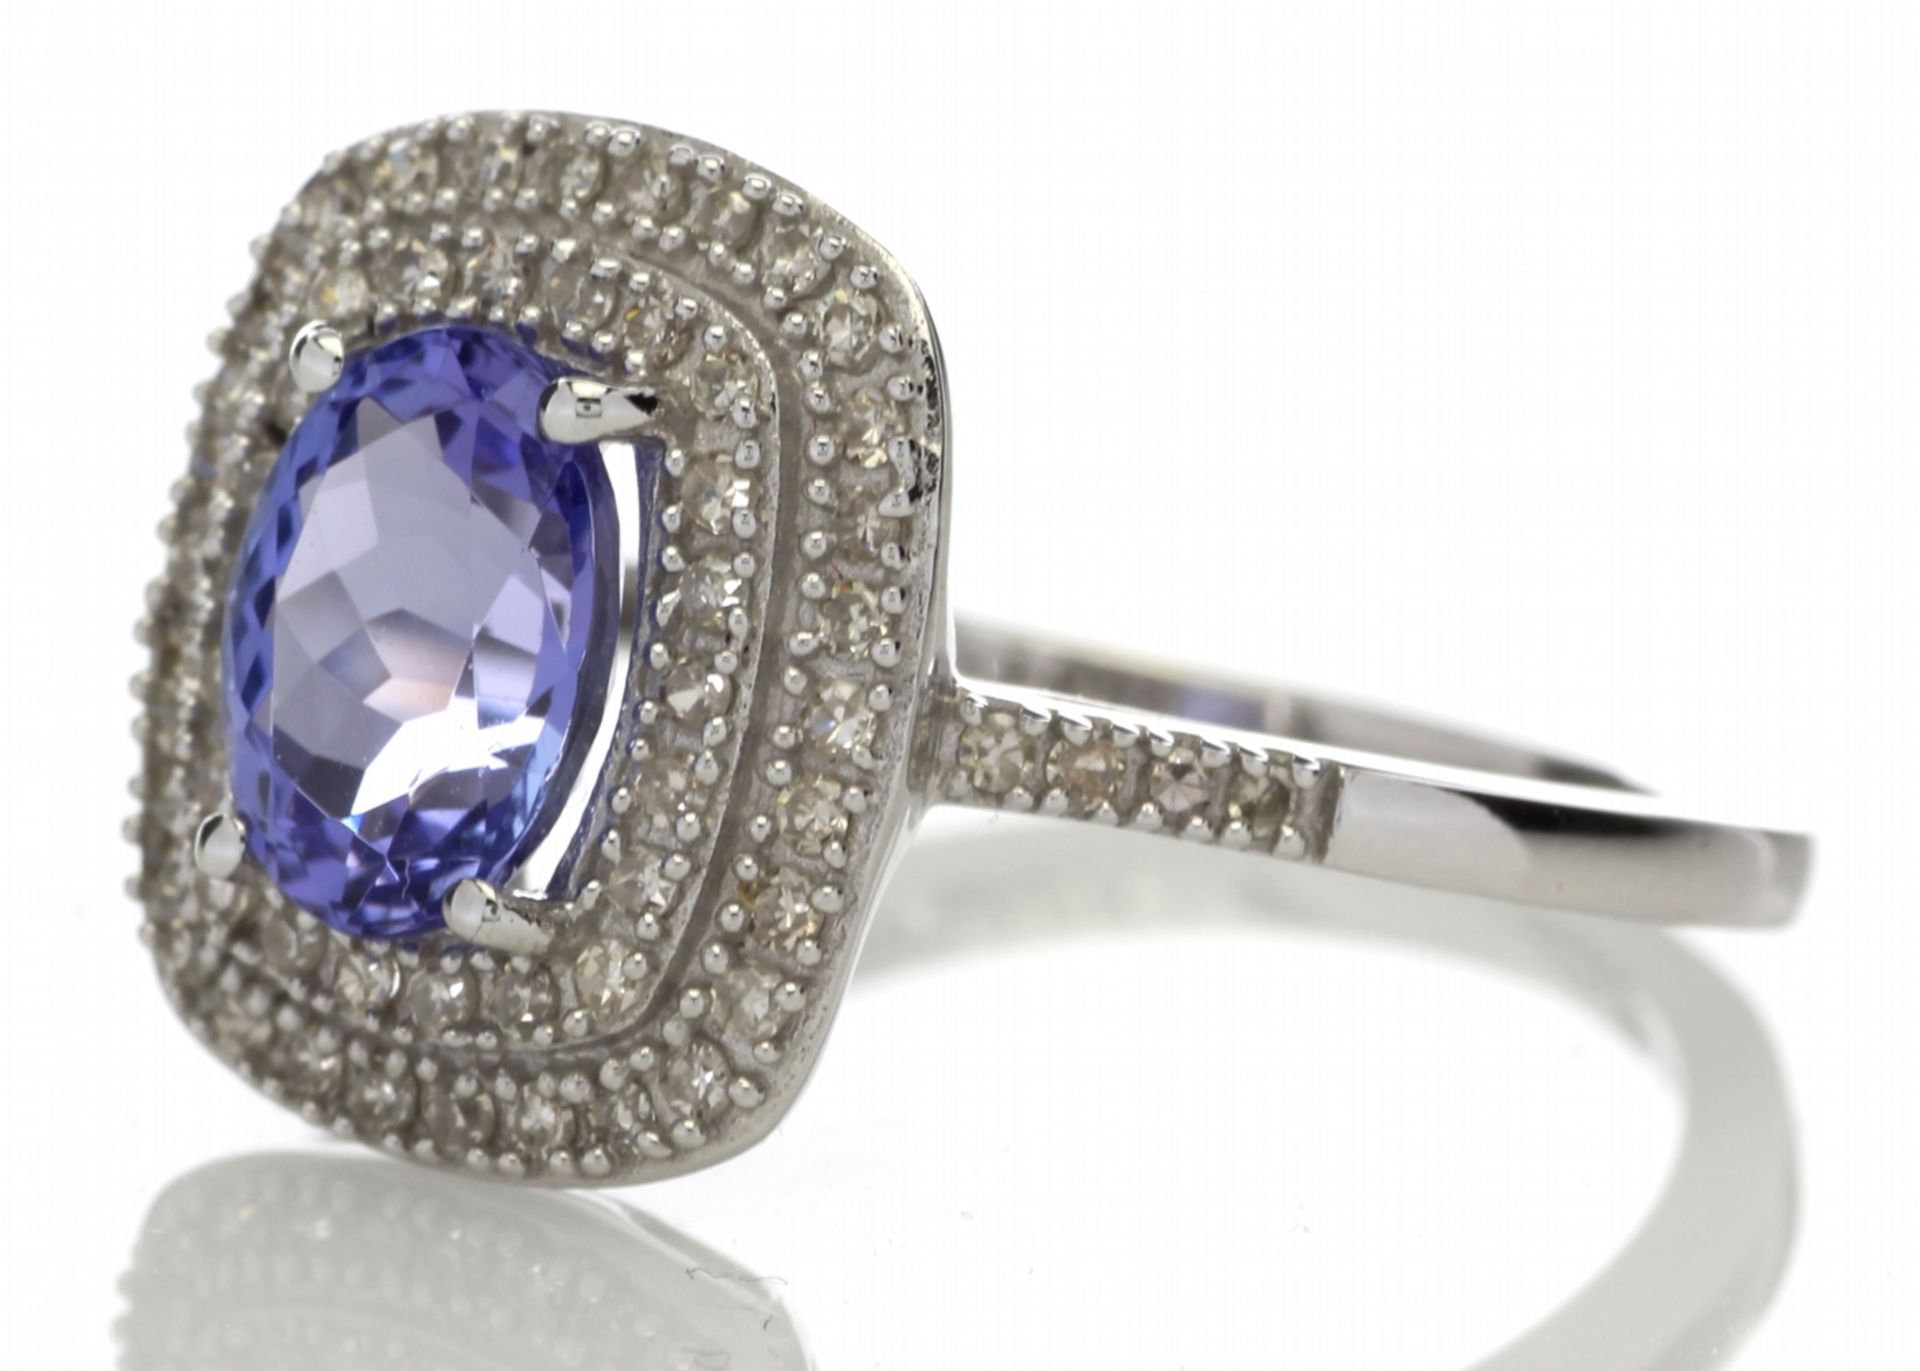 14ct Gold Oval Tanzanite And Diamond Cluster Ring 0.33 Carats - Valued by GIE £3,620.00 - A stunning - Image 2 of 5